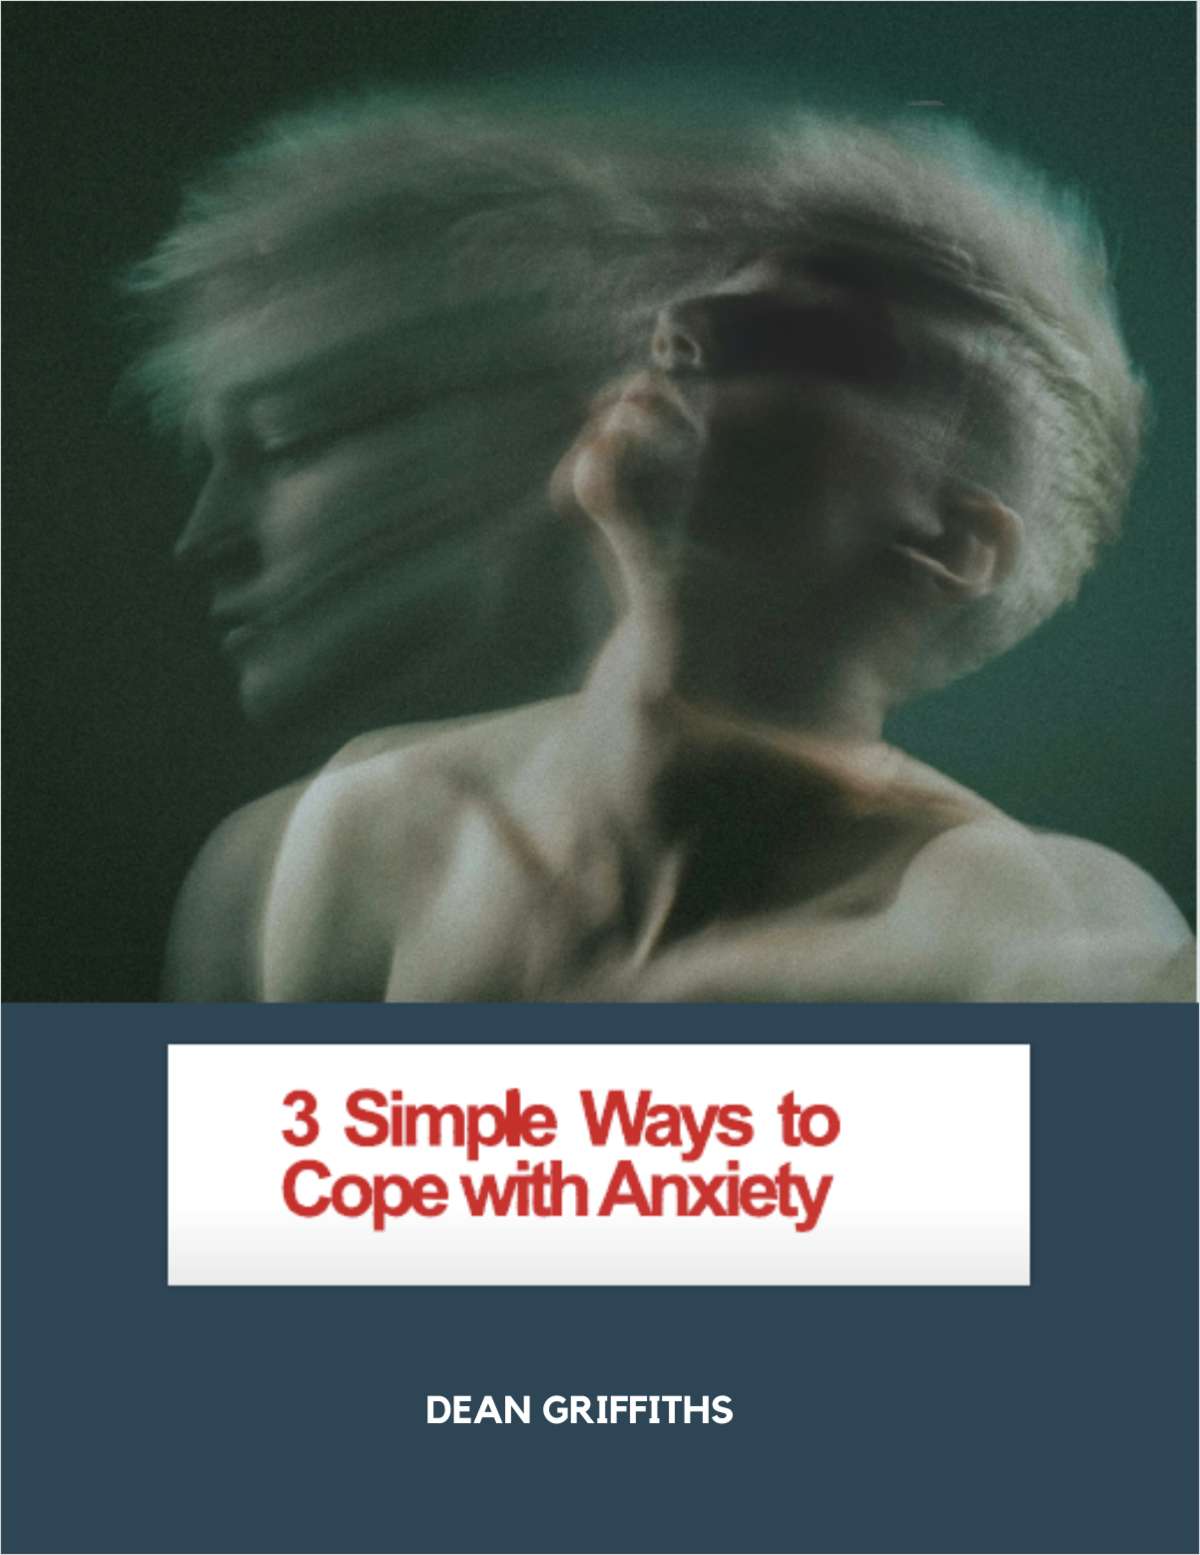 3 Simply Ways to Cope with Anxiety